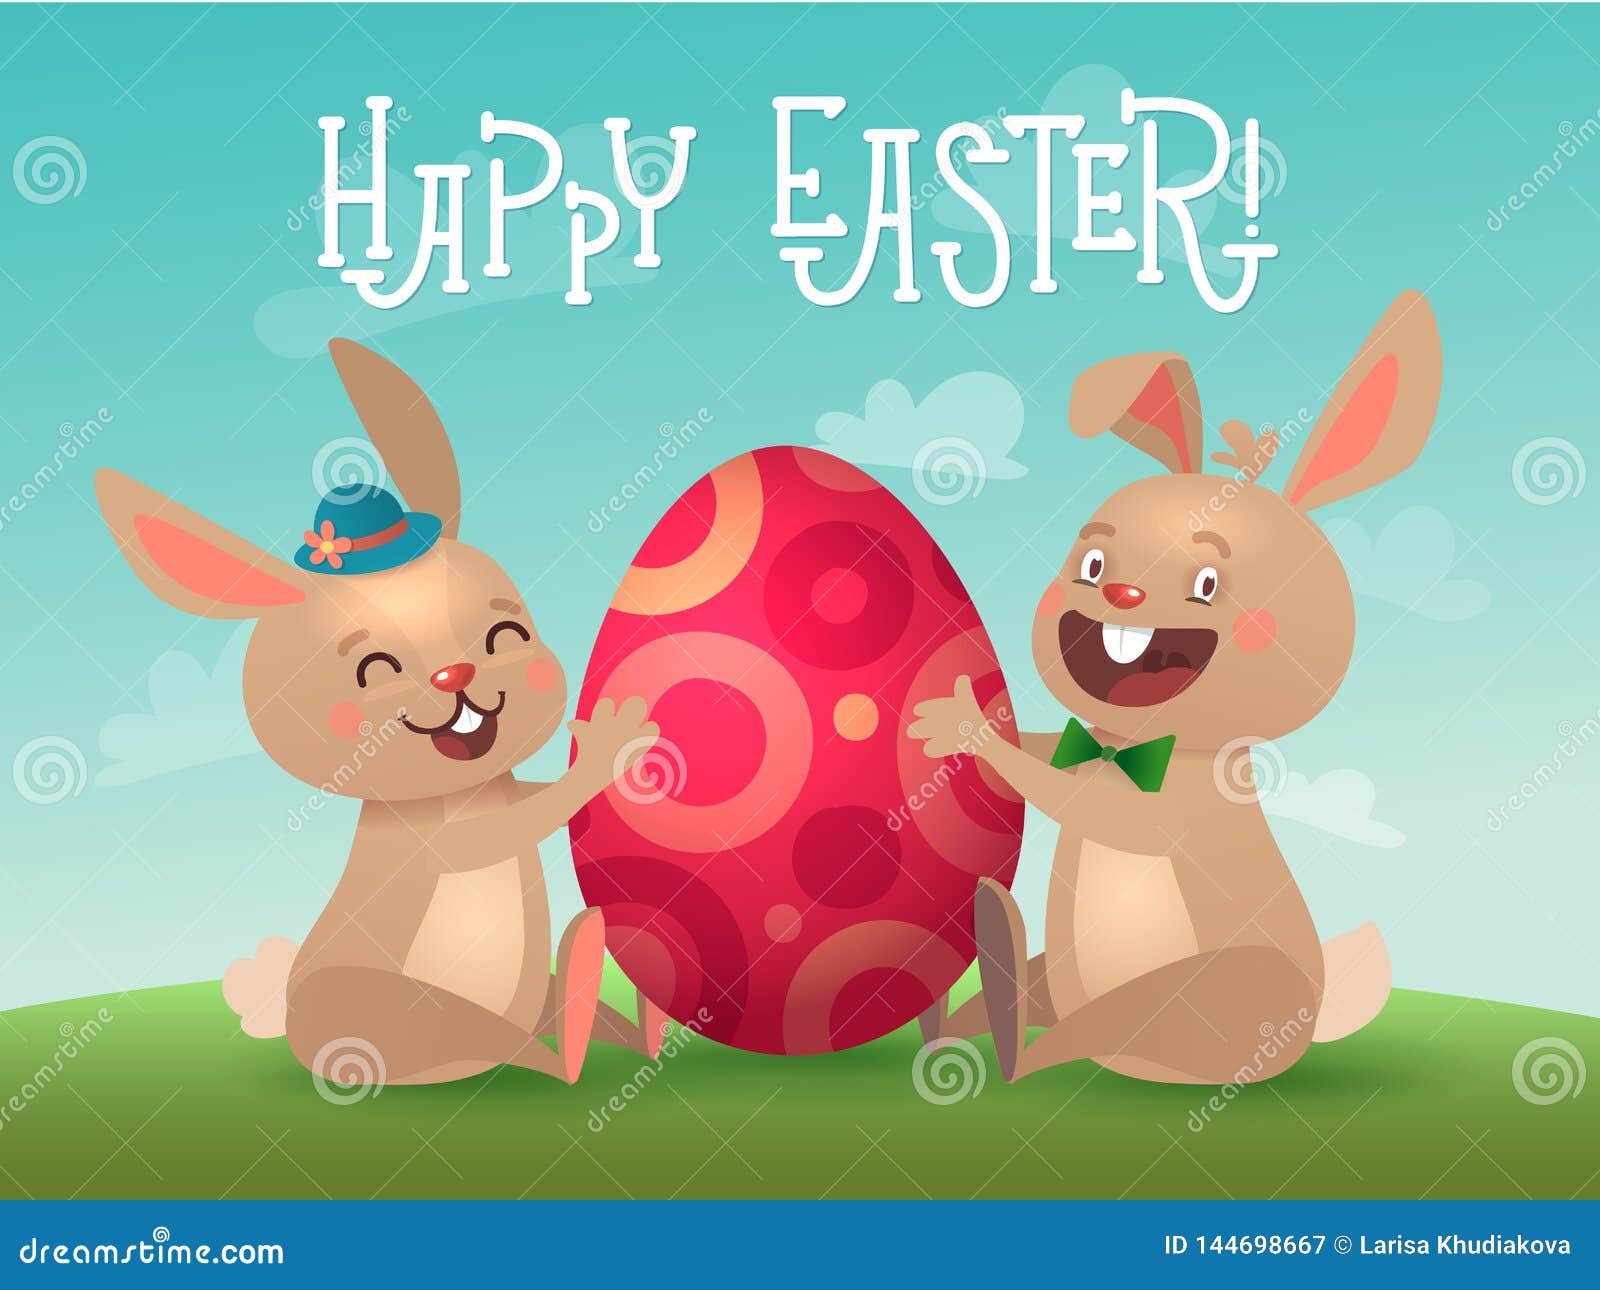 Happy Easter Greeting Card with Egg and Bunnies. Two Brown Cute Easter ...